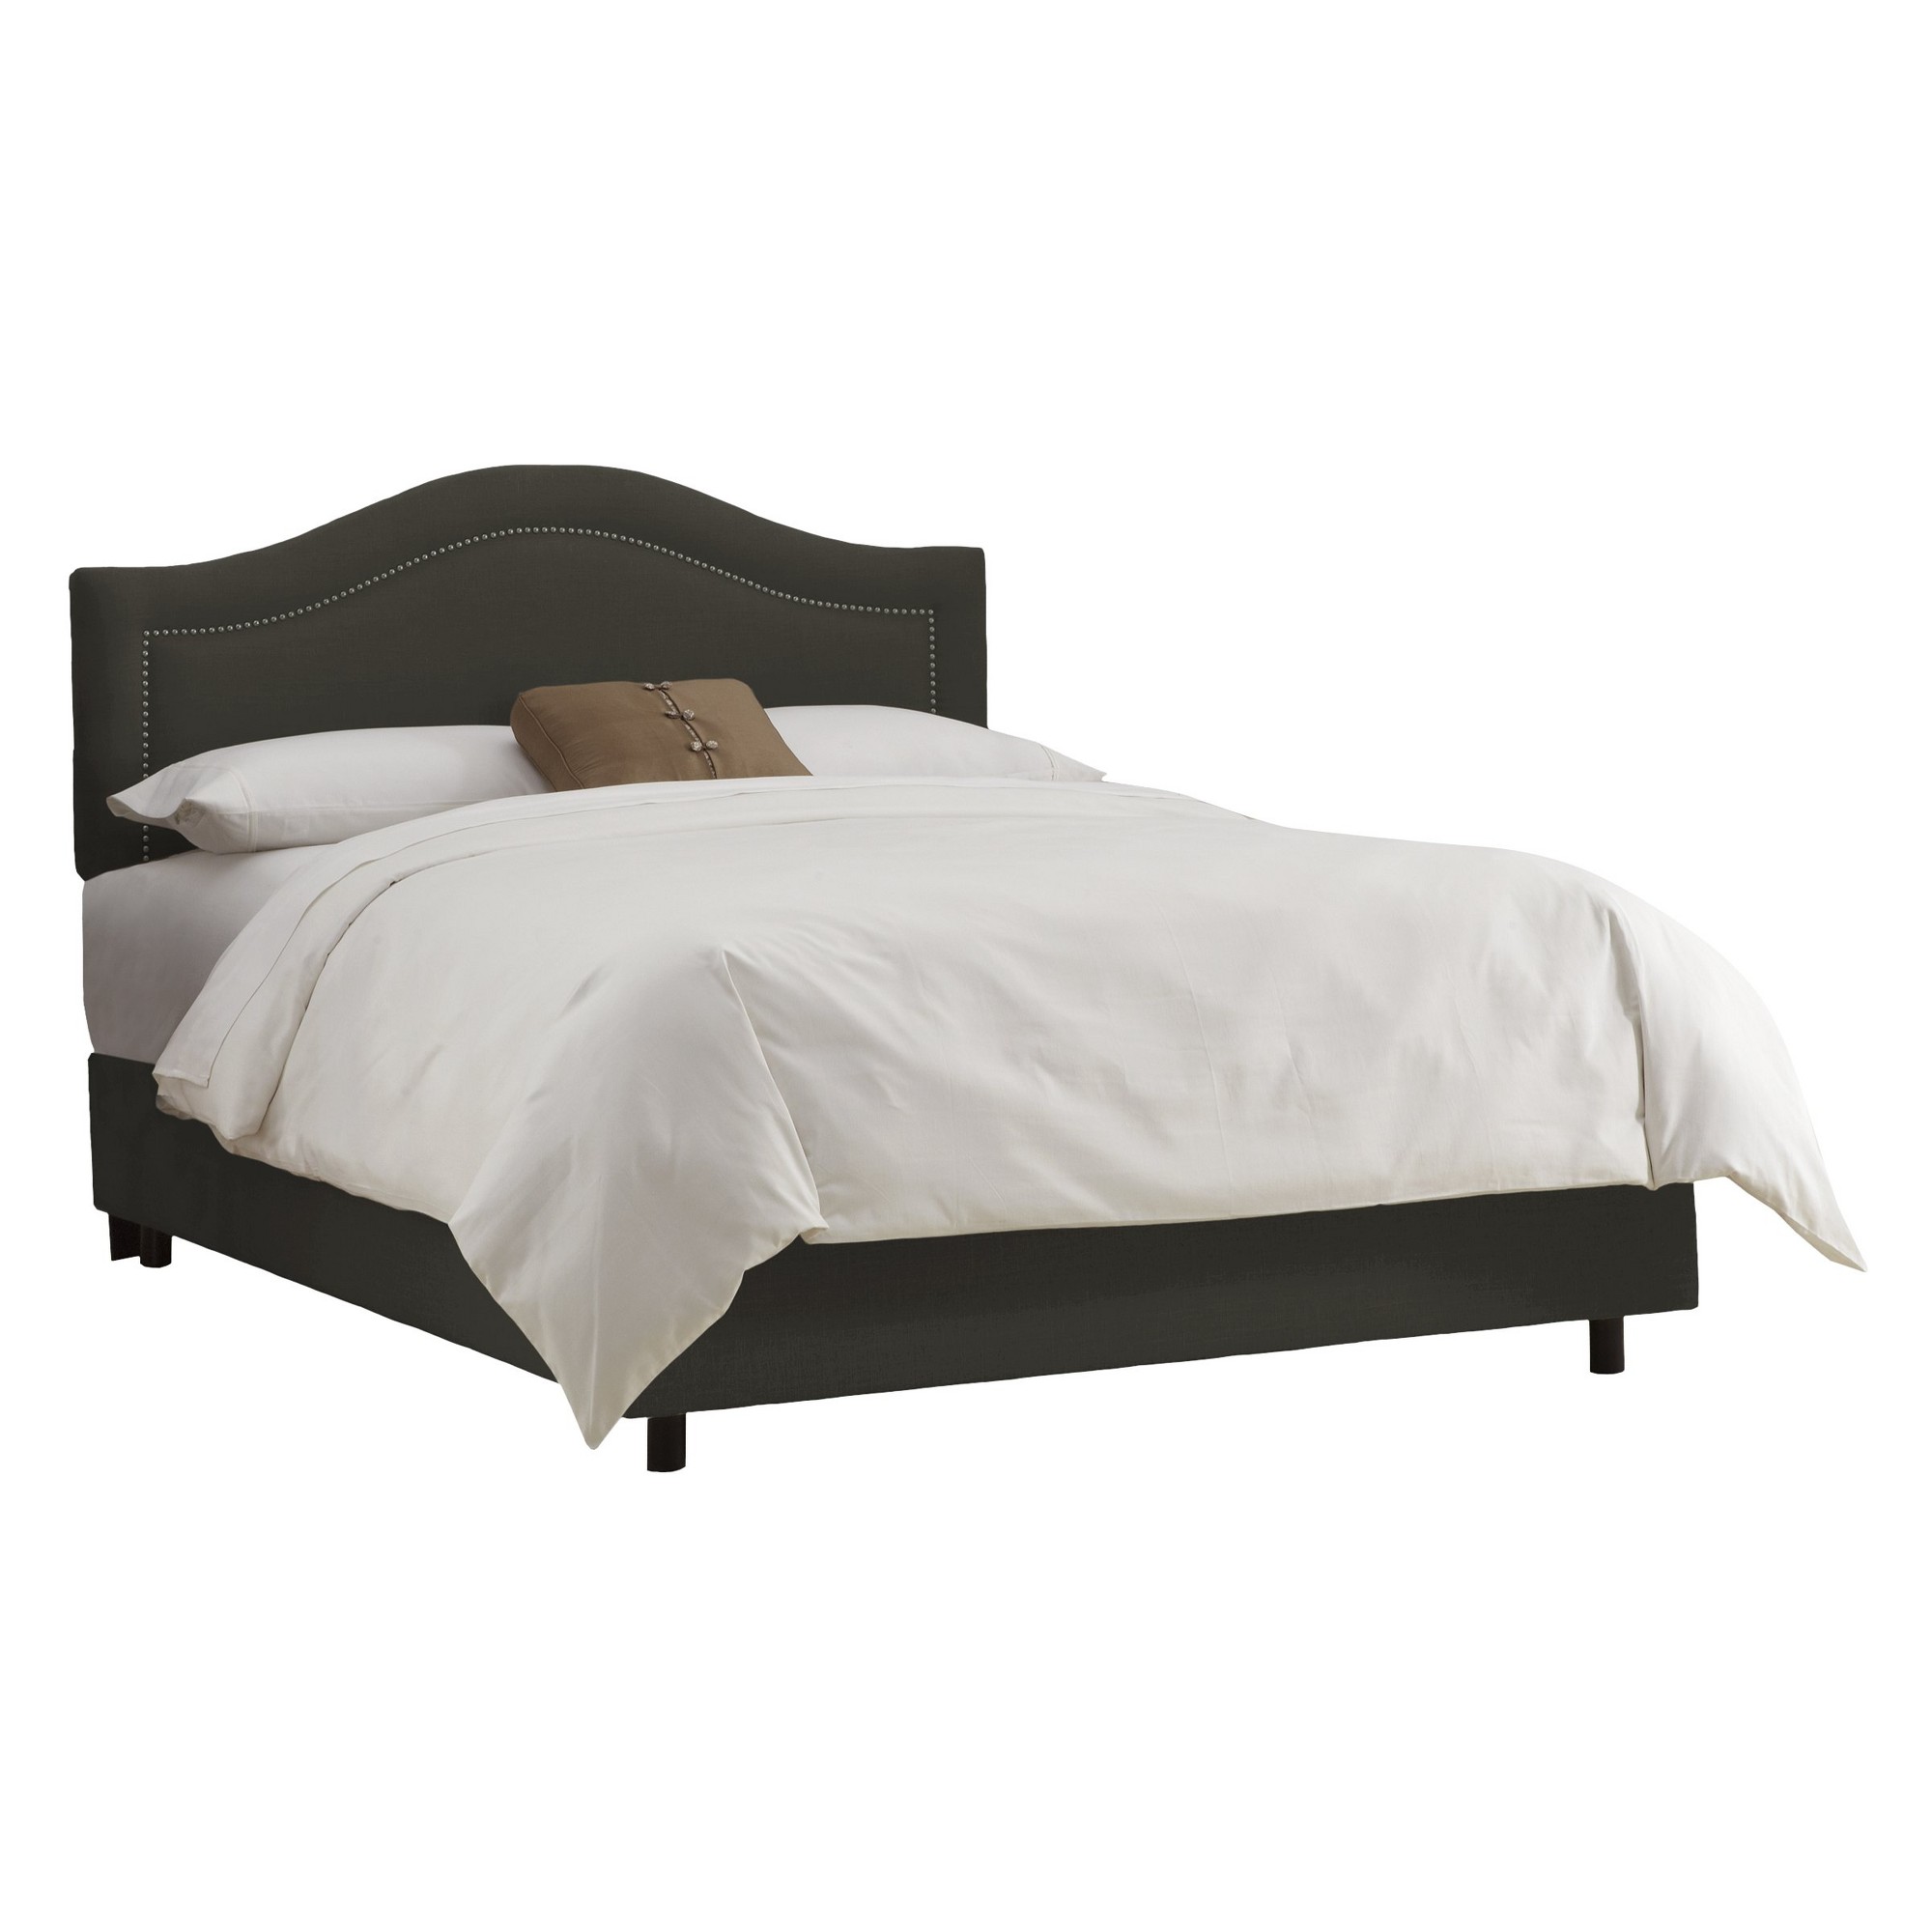 Skyline Furniture Merion Inset Nailbutton Bed - Charcoal (Full) - Skyline Furniture , Grey